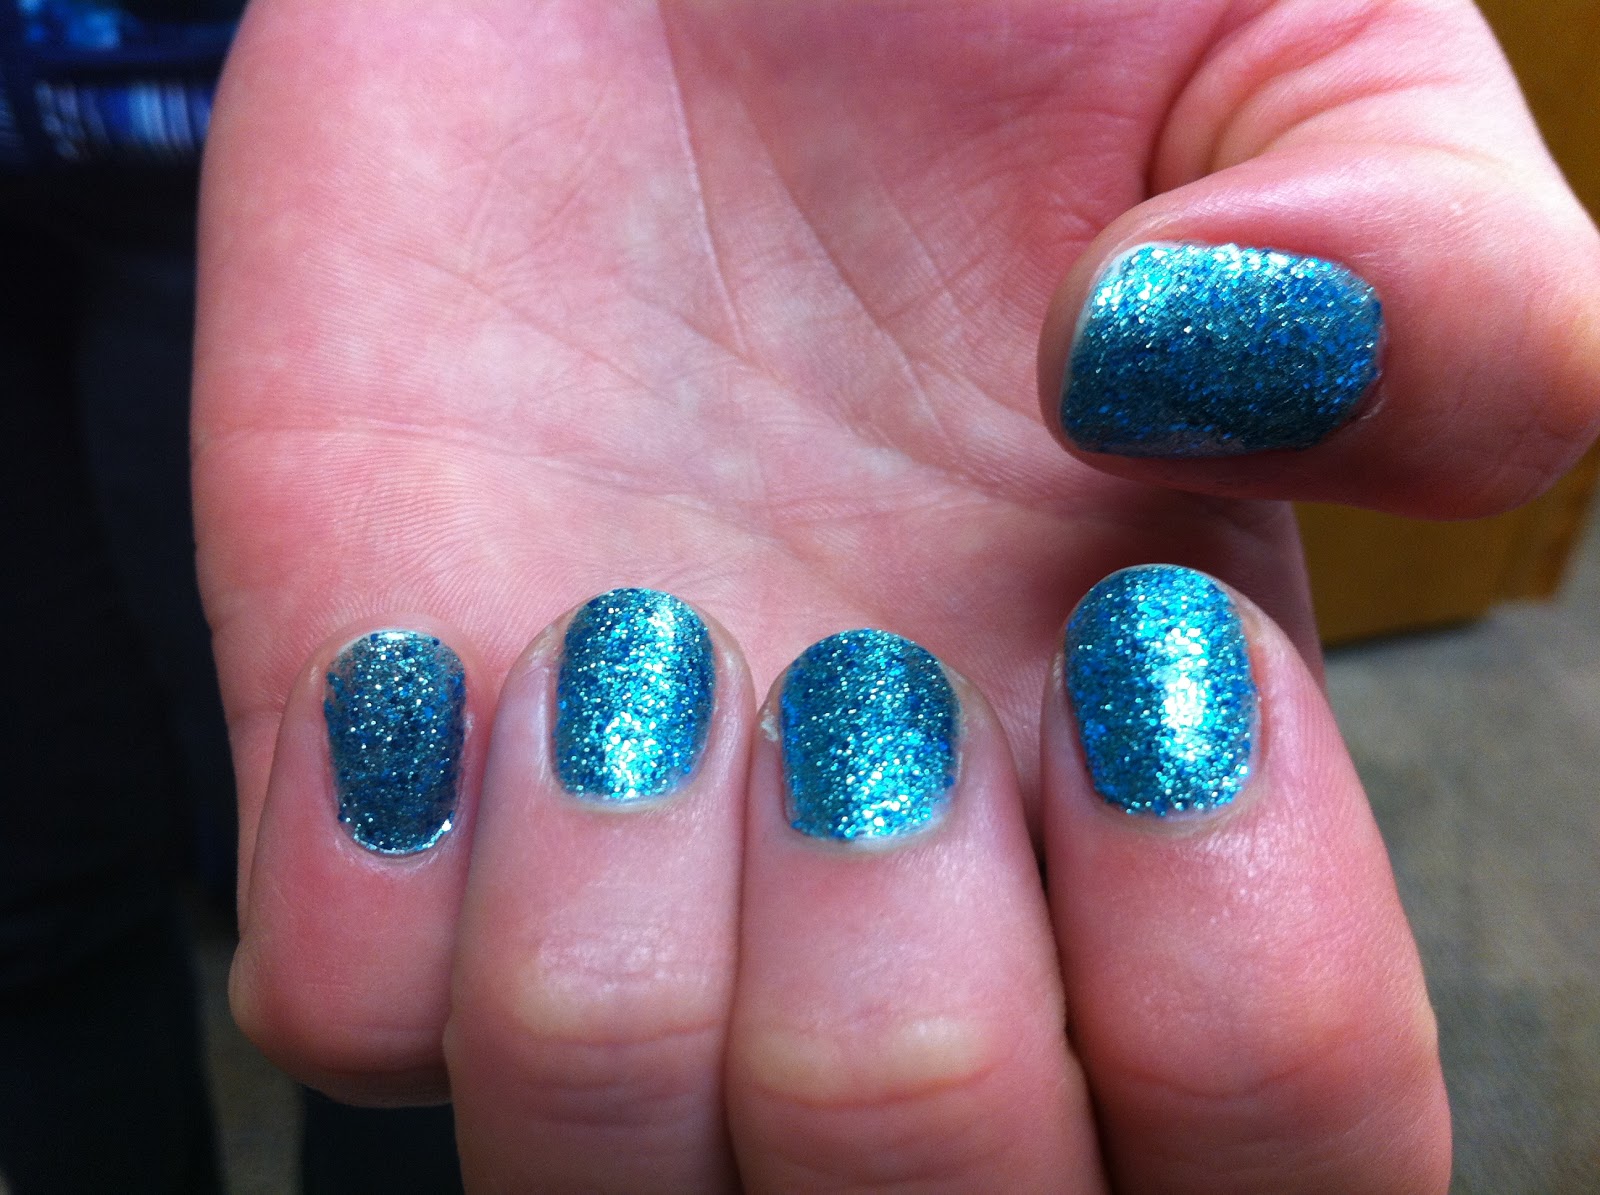 Nails+Inc.+Fitzroy+Square+3D+Glitter Polished: Nails Inc. This polish is